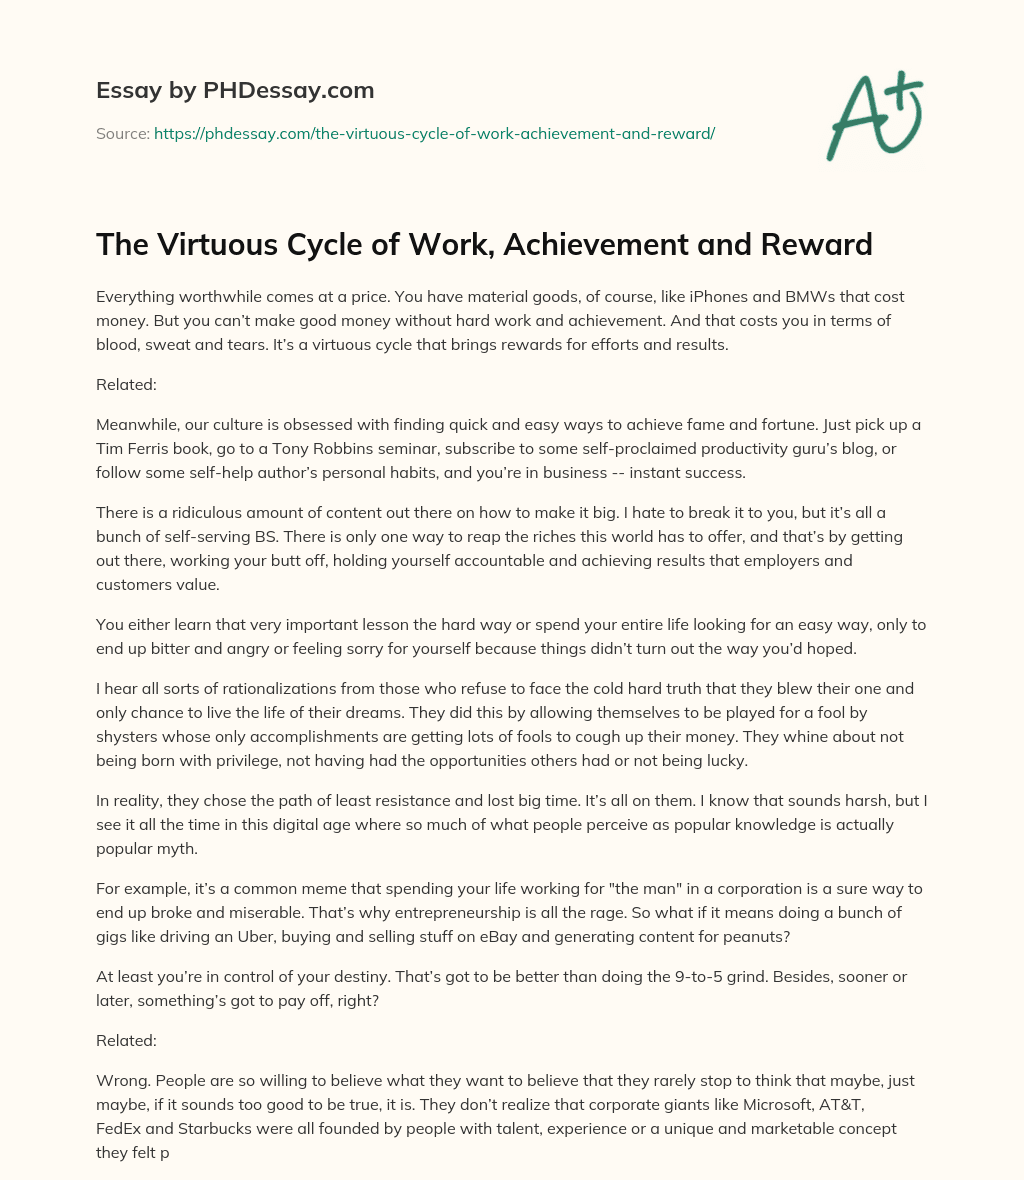 The Virtuous Cycle of Work, Achievement and Reward essay